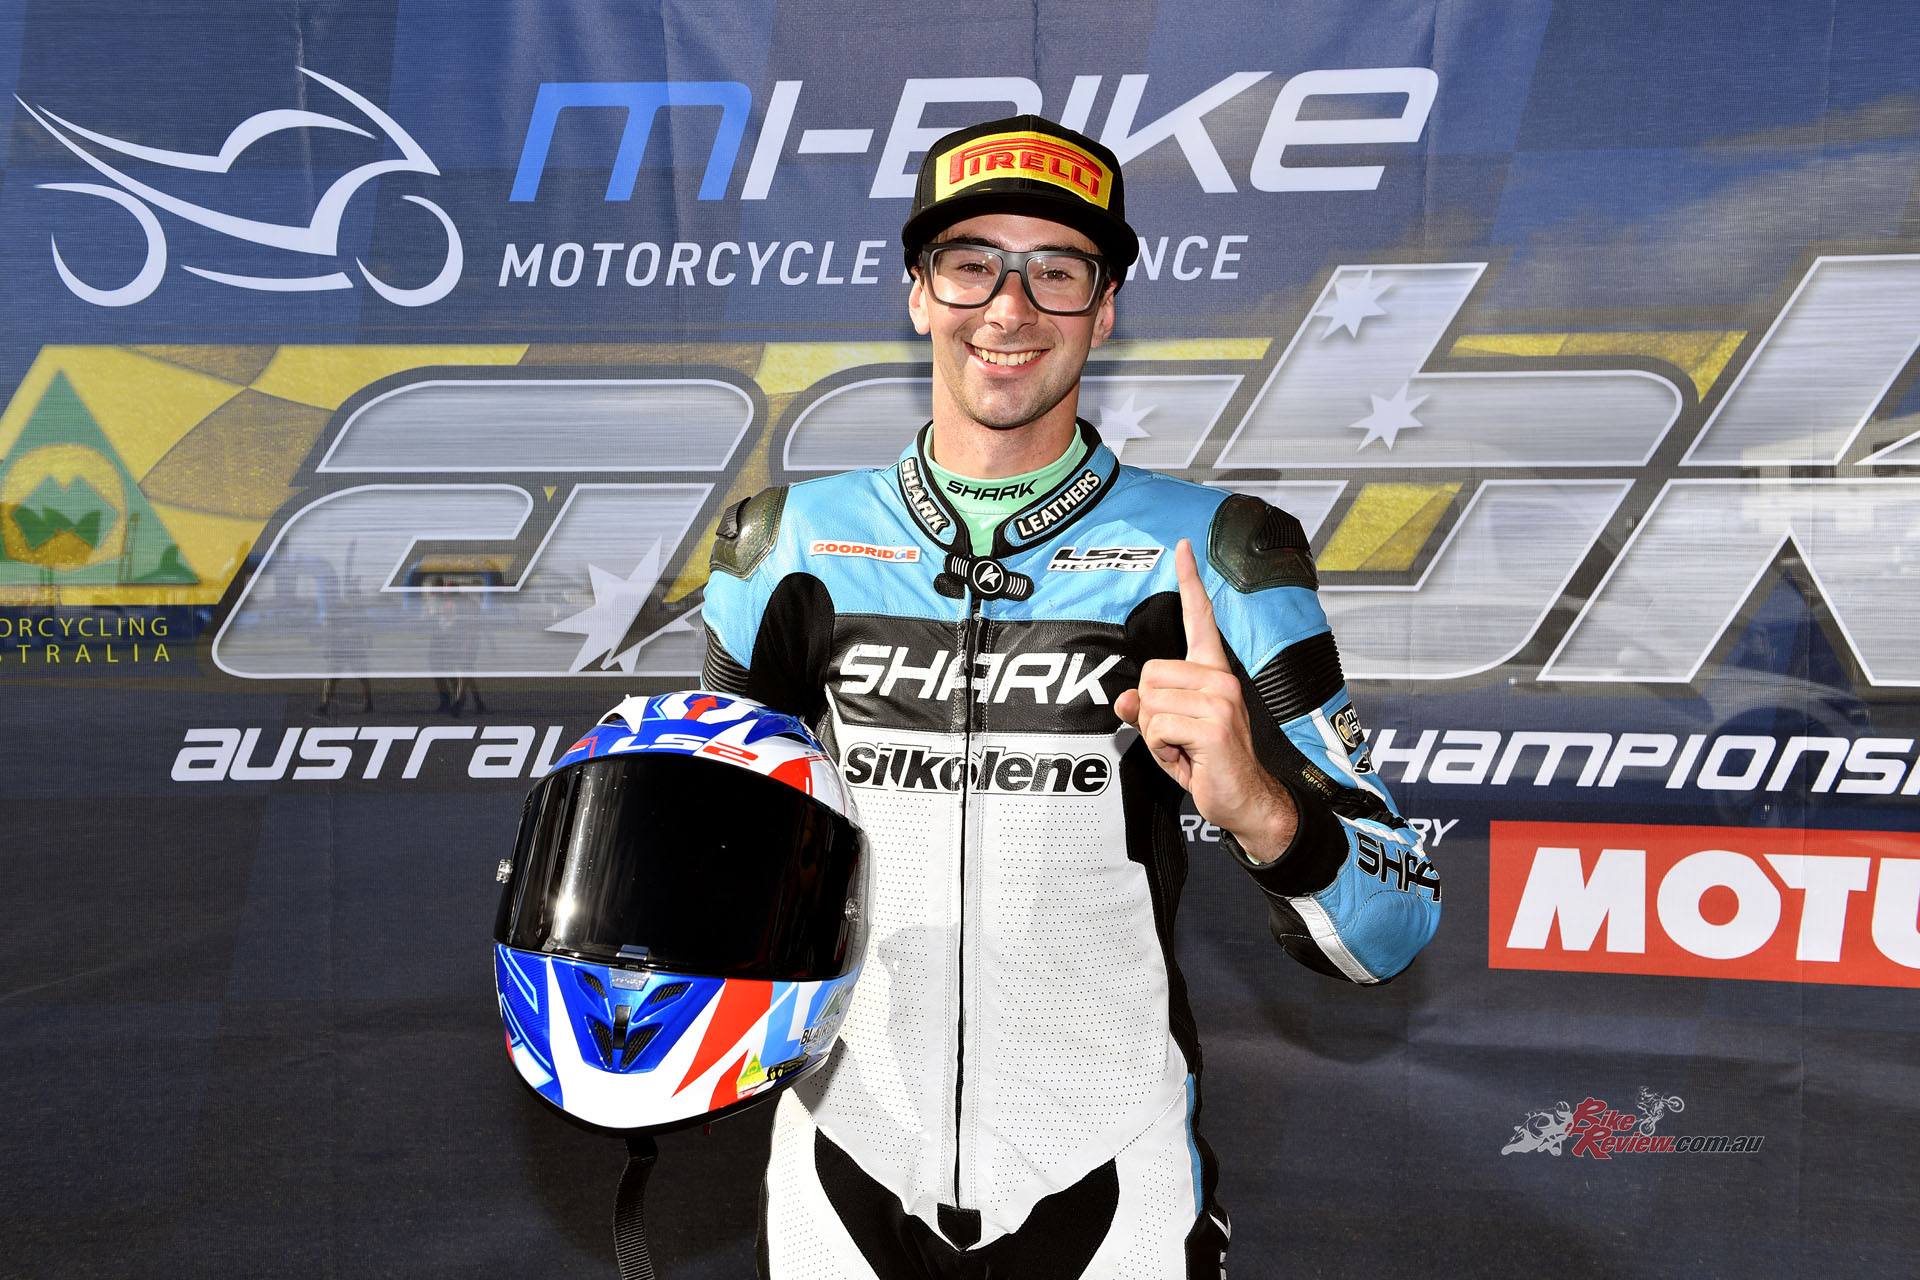 Only one 2023 champion was crowned today: Keo Watson in the popular Sureflight Superbike Masters class.